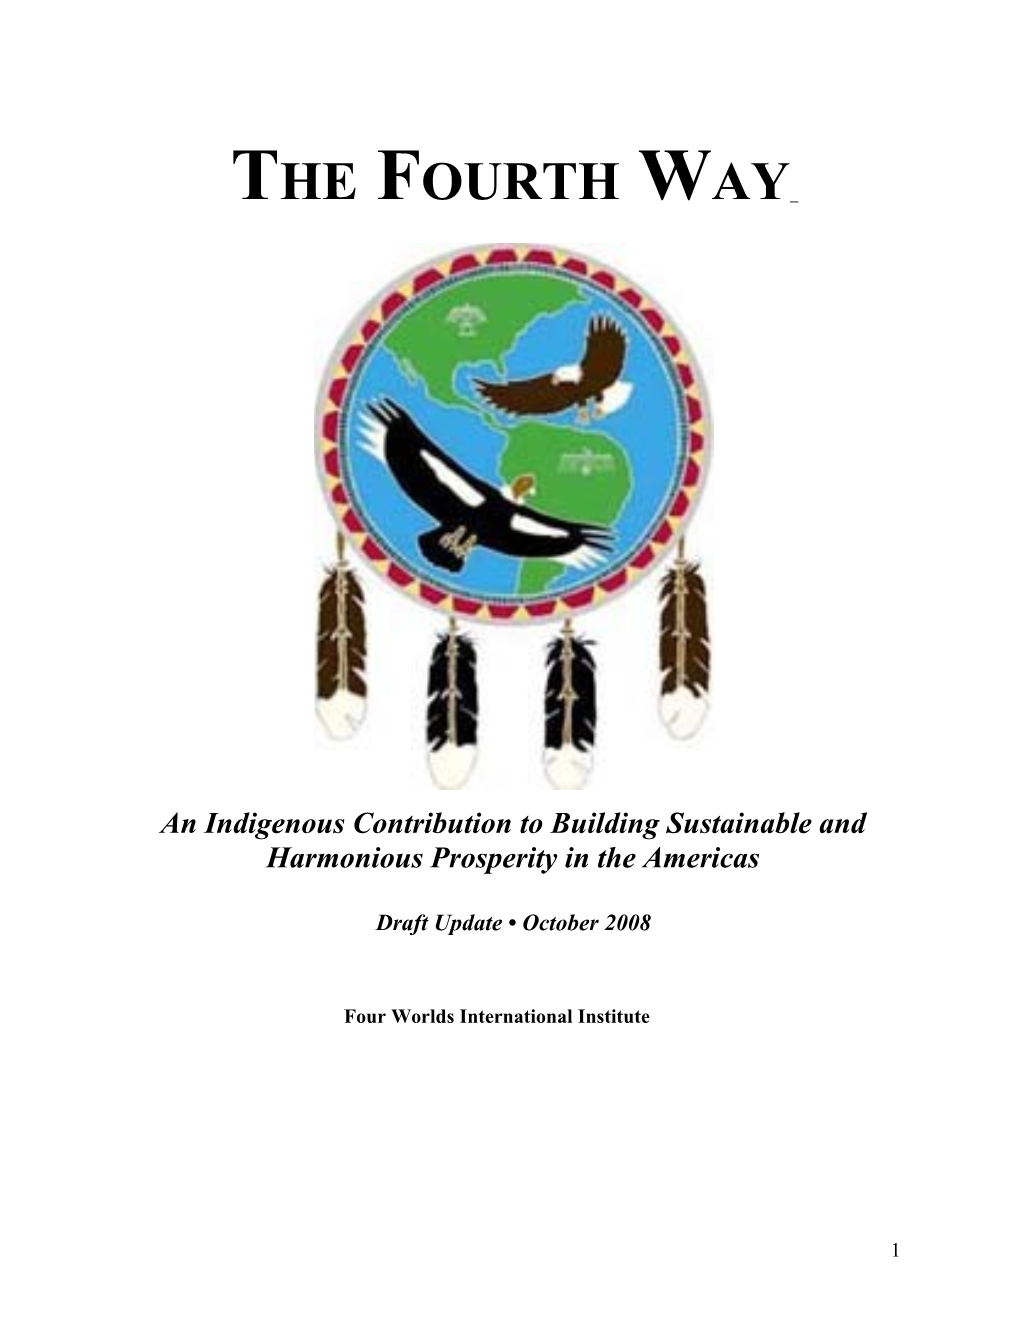 The Fourth Way: an Indigenous Contribution to the War on Terrorism